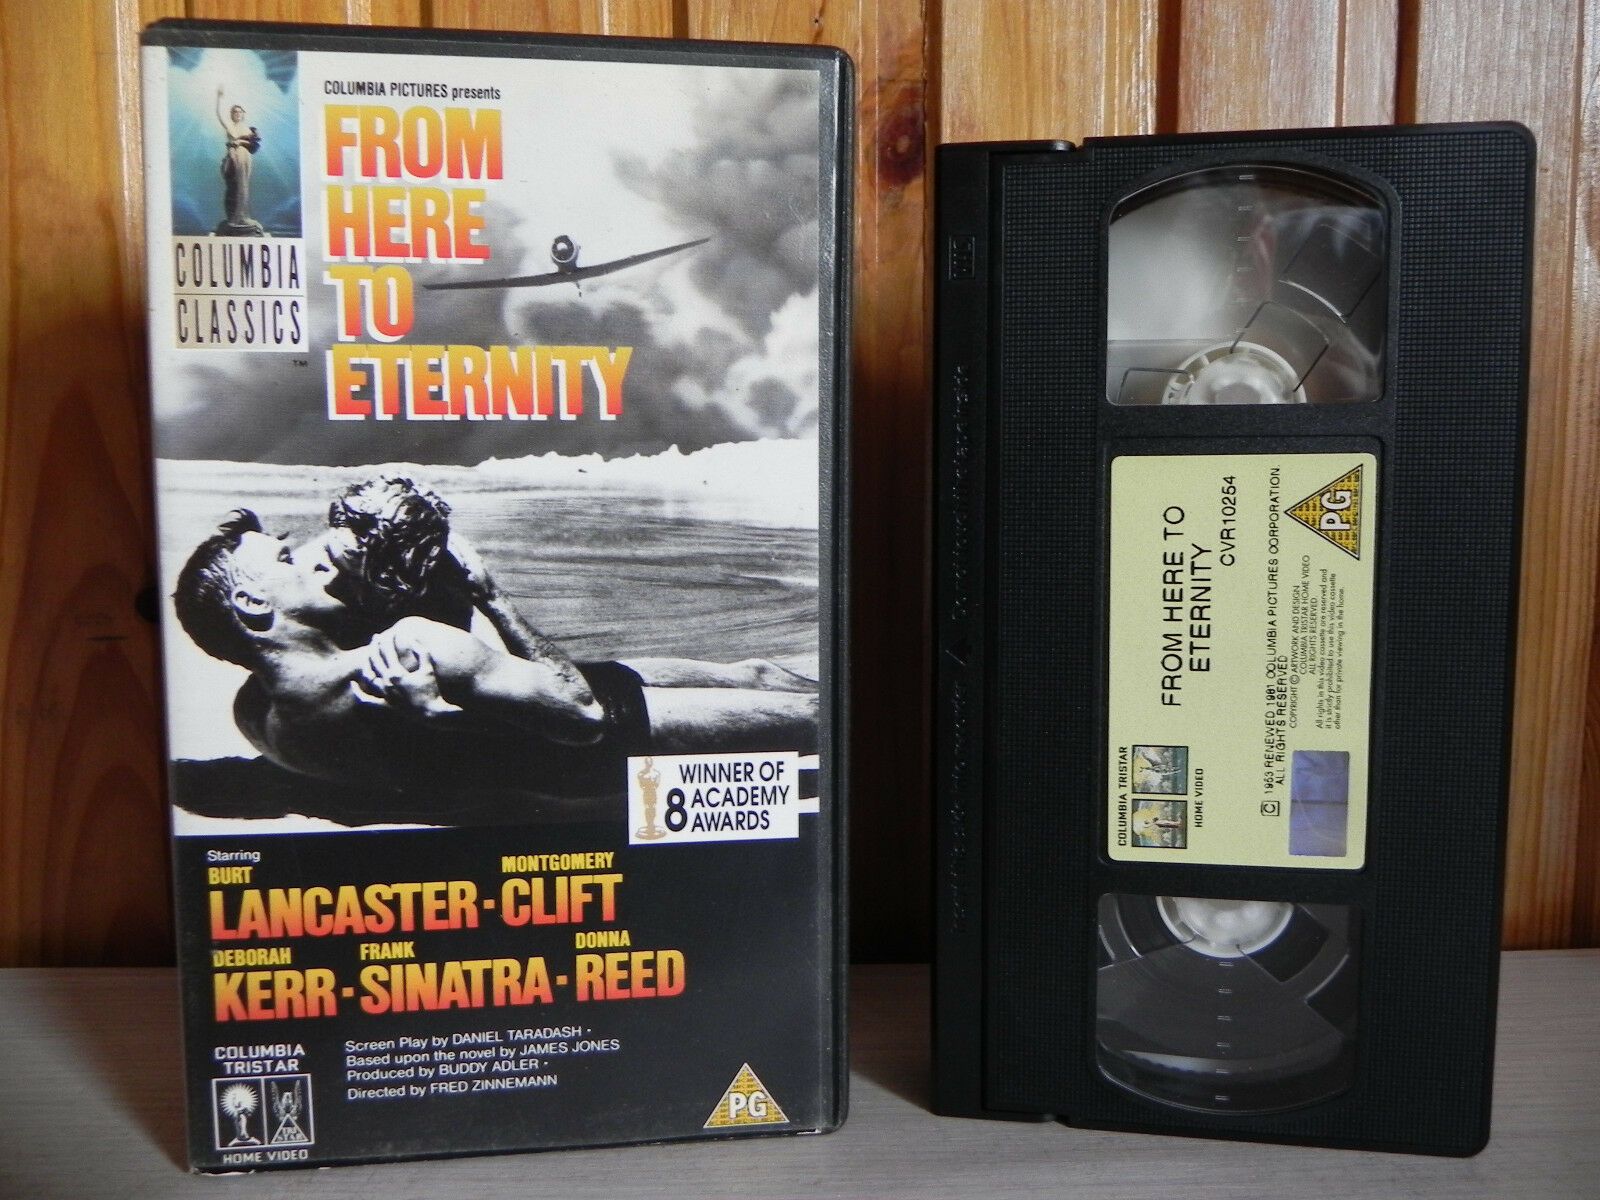 From Here To Eternity - Columbia Tristar - Drama - 8 Academy Awards - Pal VHS-